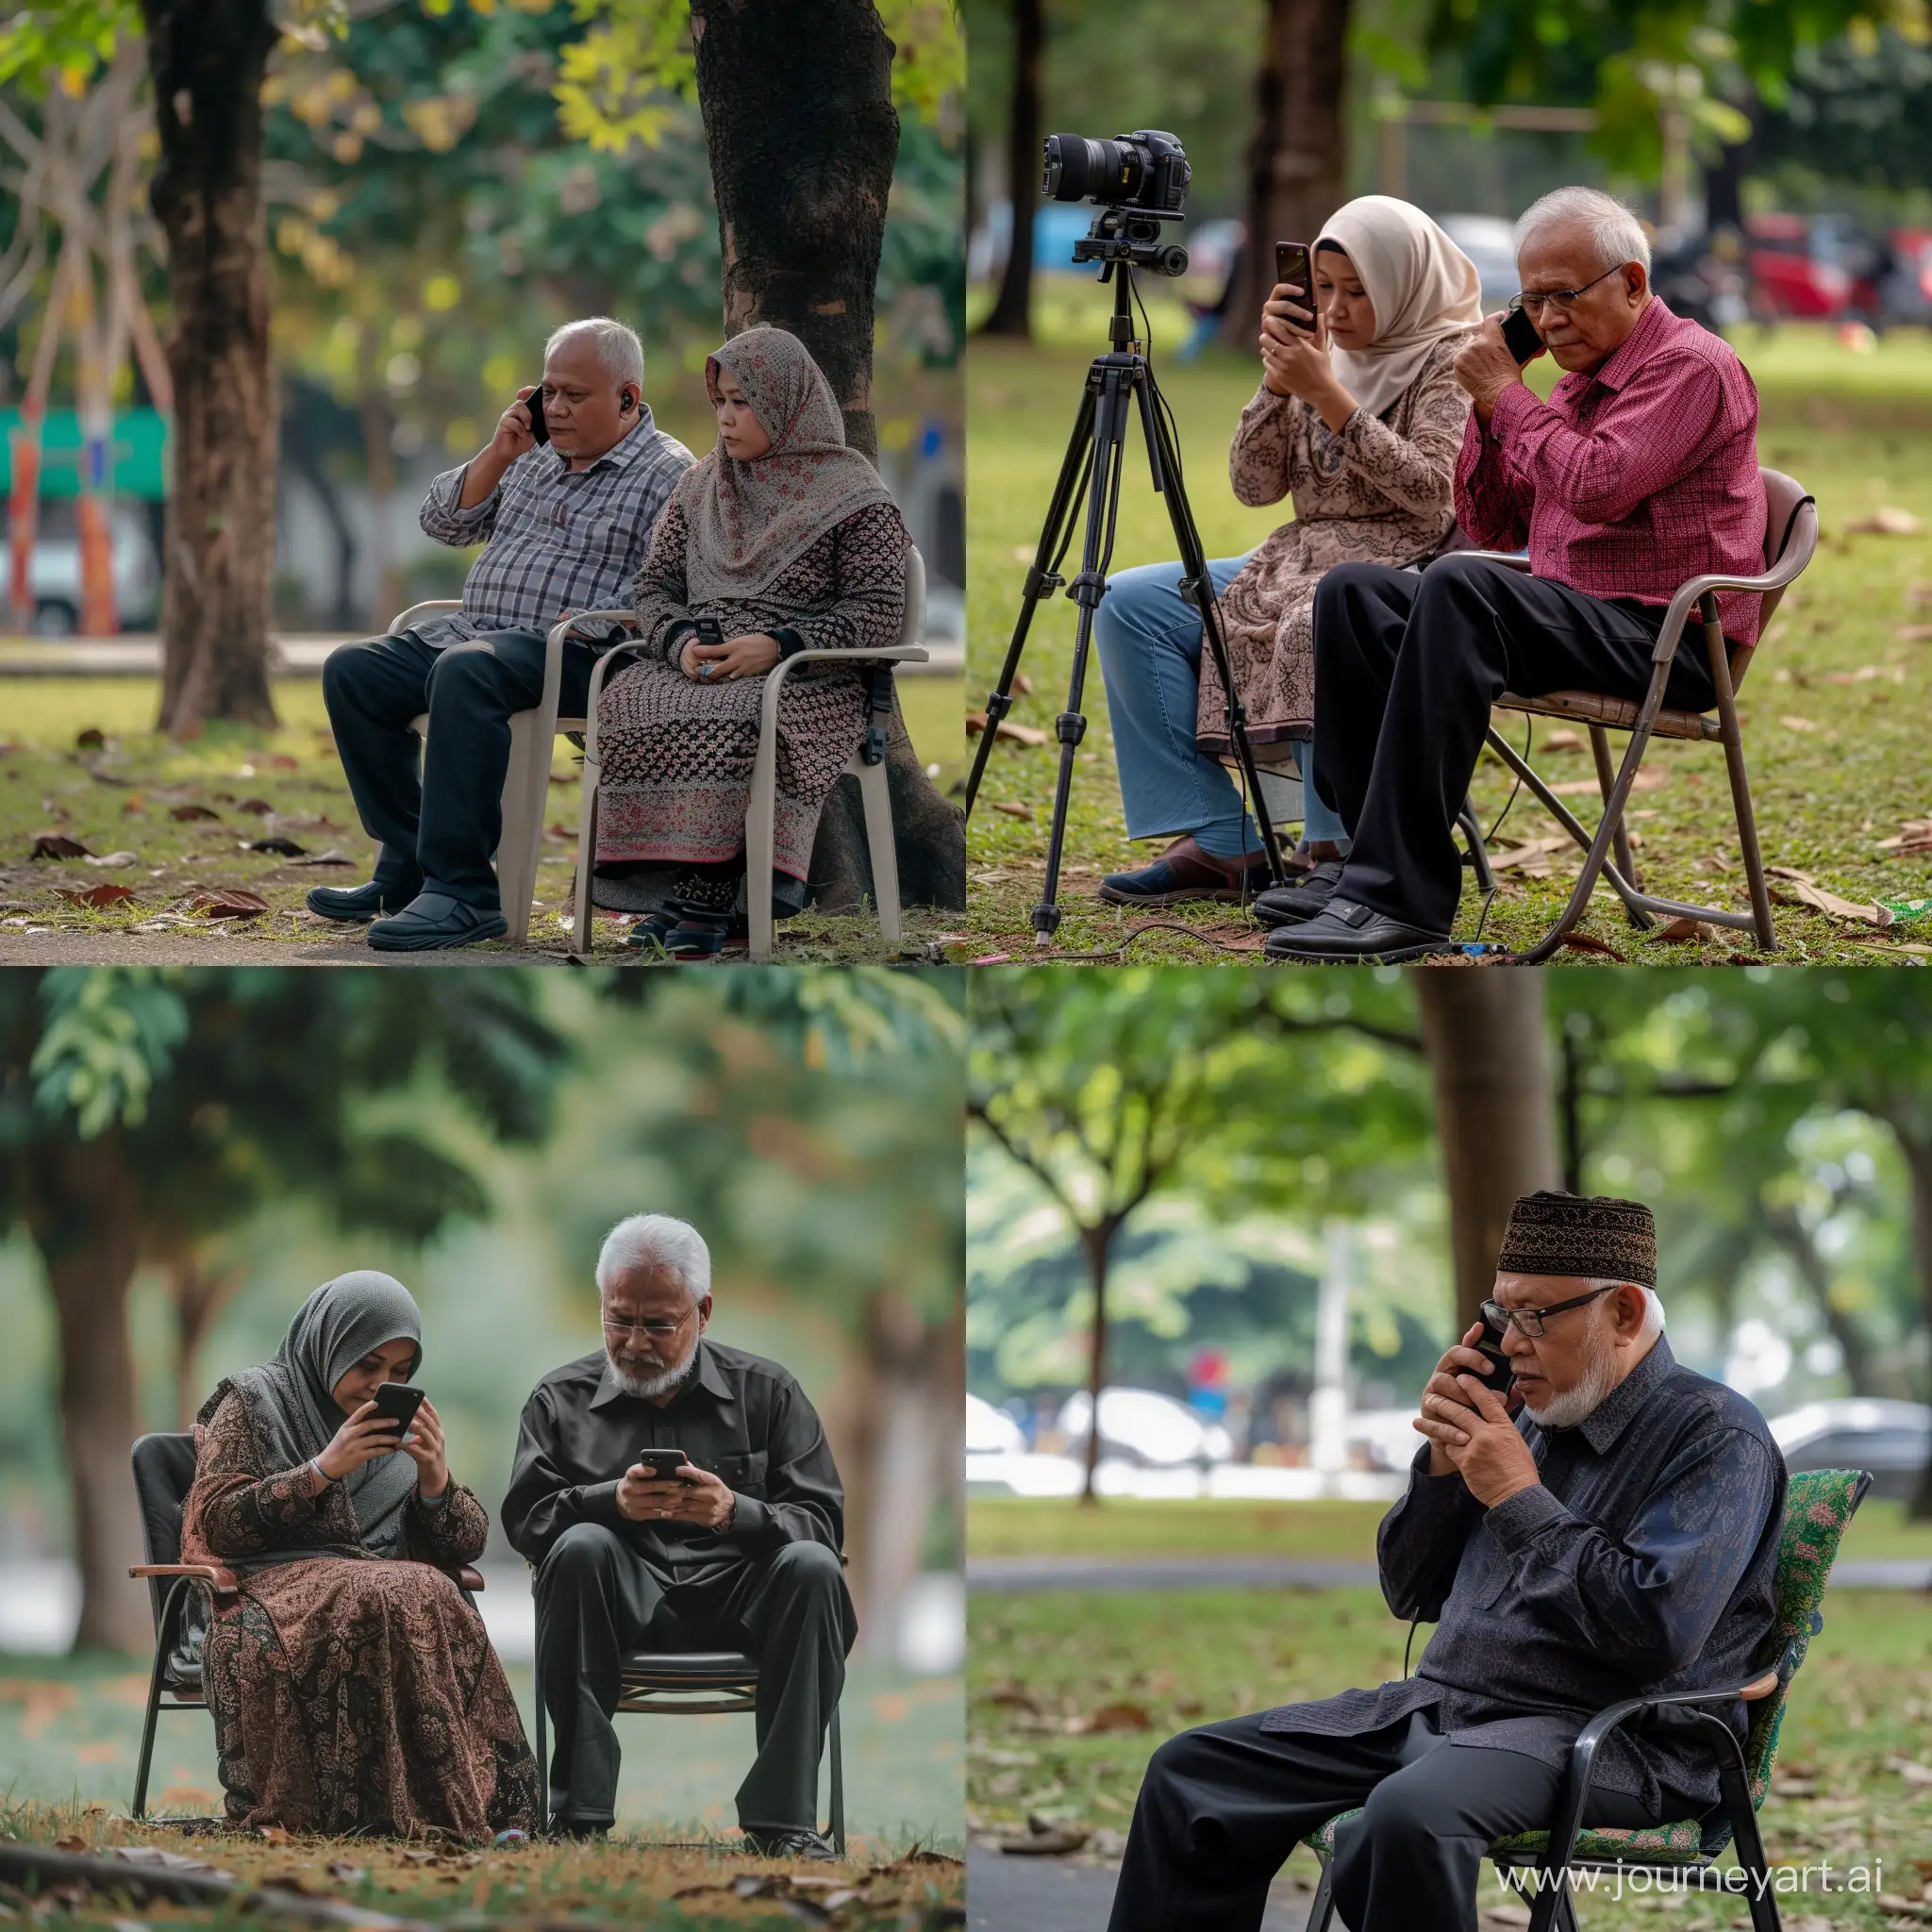 ultra realistic, malay man sitting on a chair while playing on the phone with his partner, park area, canon eos-id x mark iii dslr --v 6.0